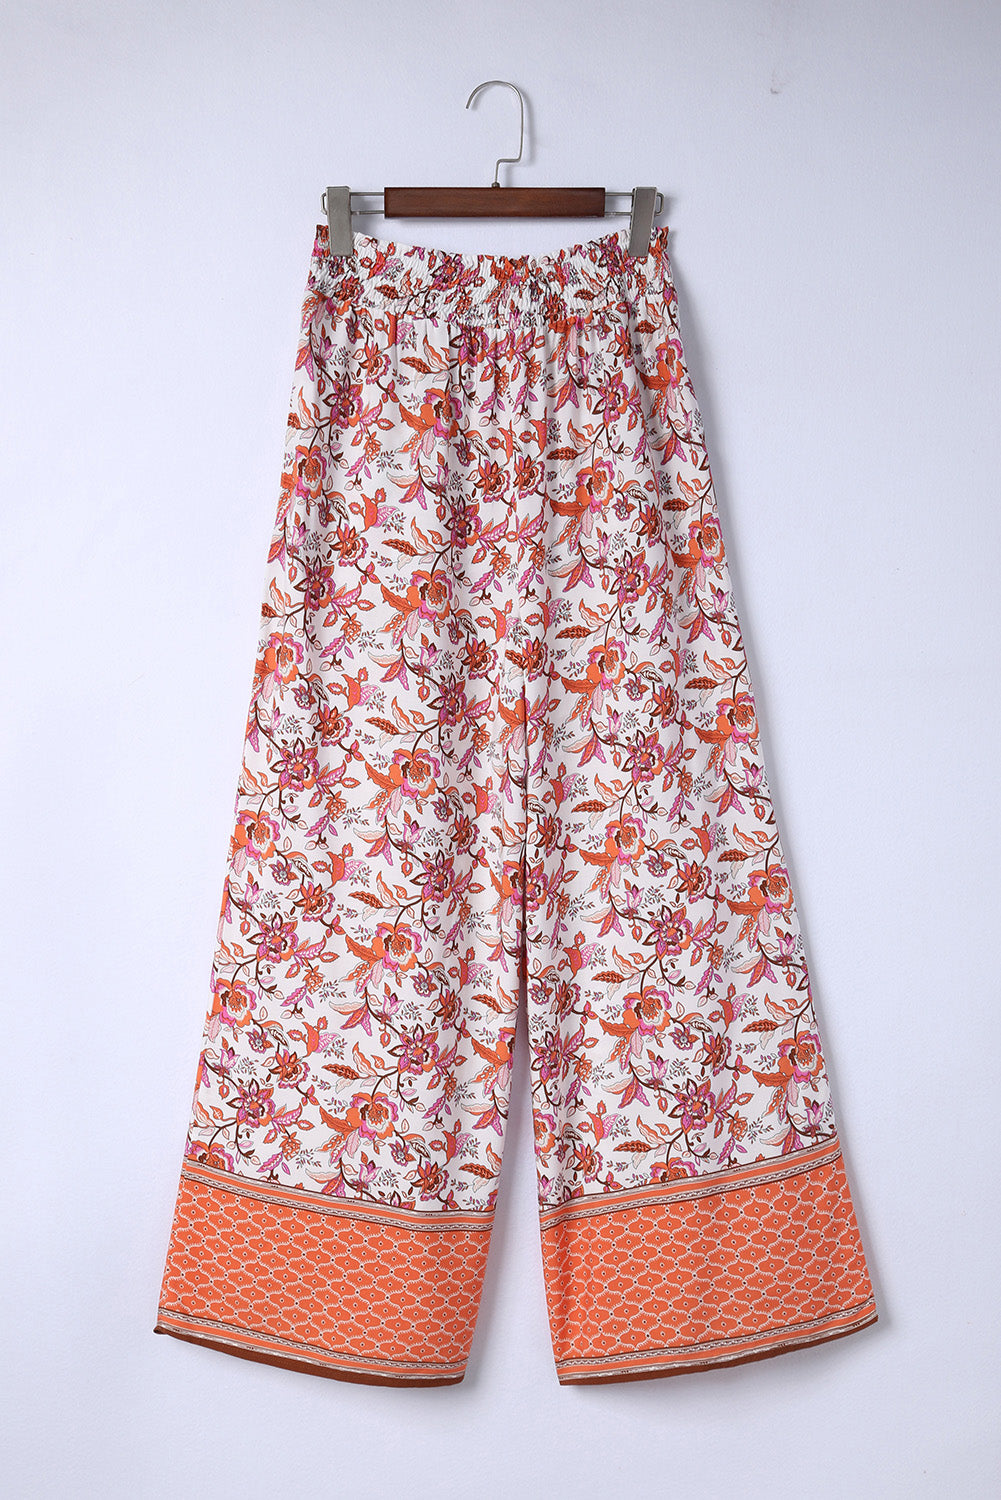 Breathable and stylish floral print palazzo pants with an elastic waistband